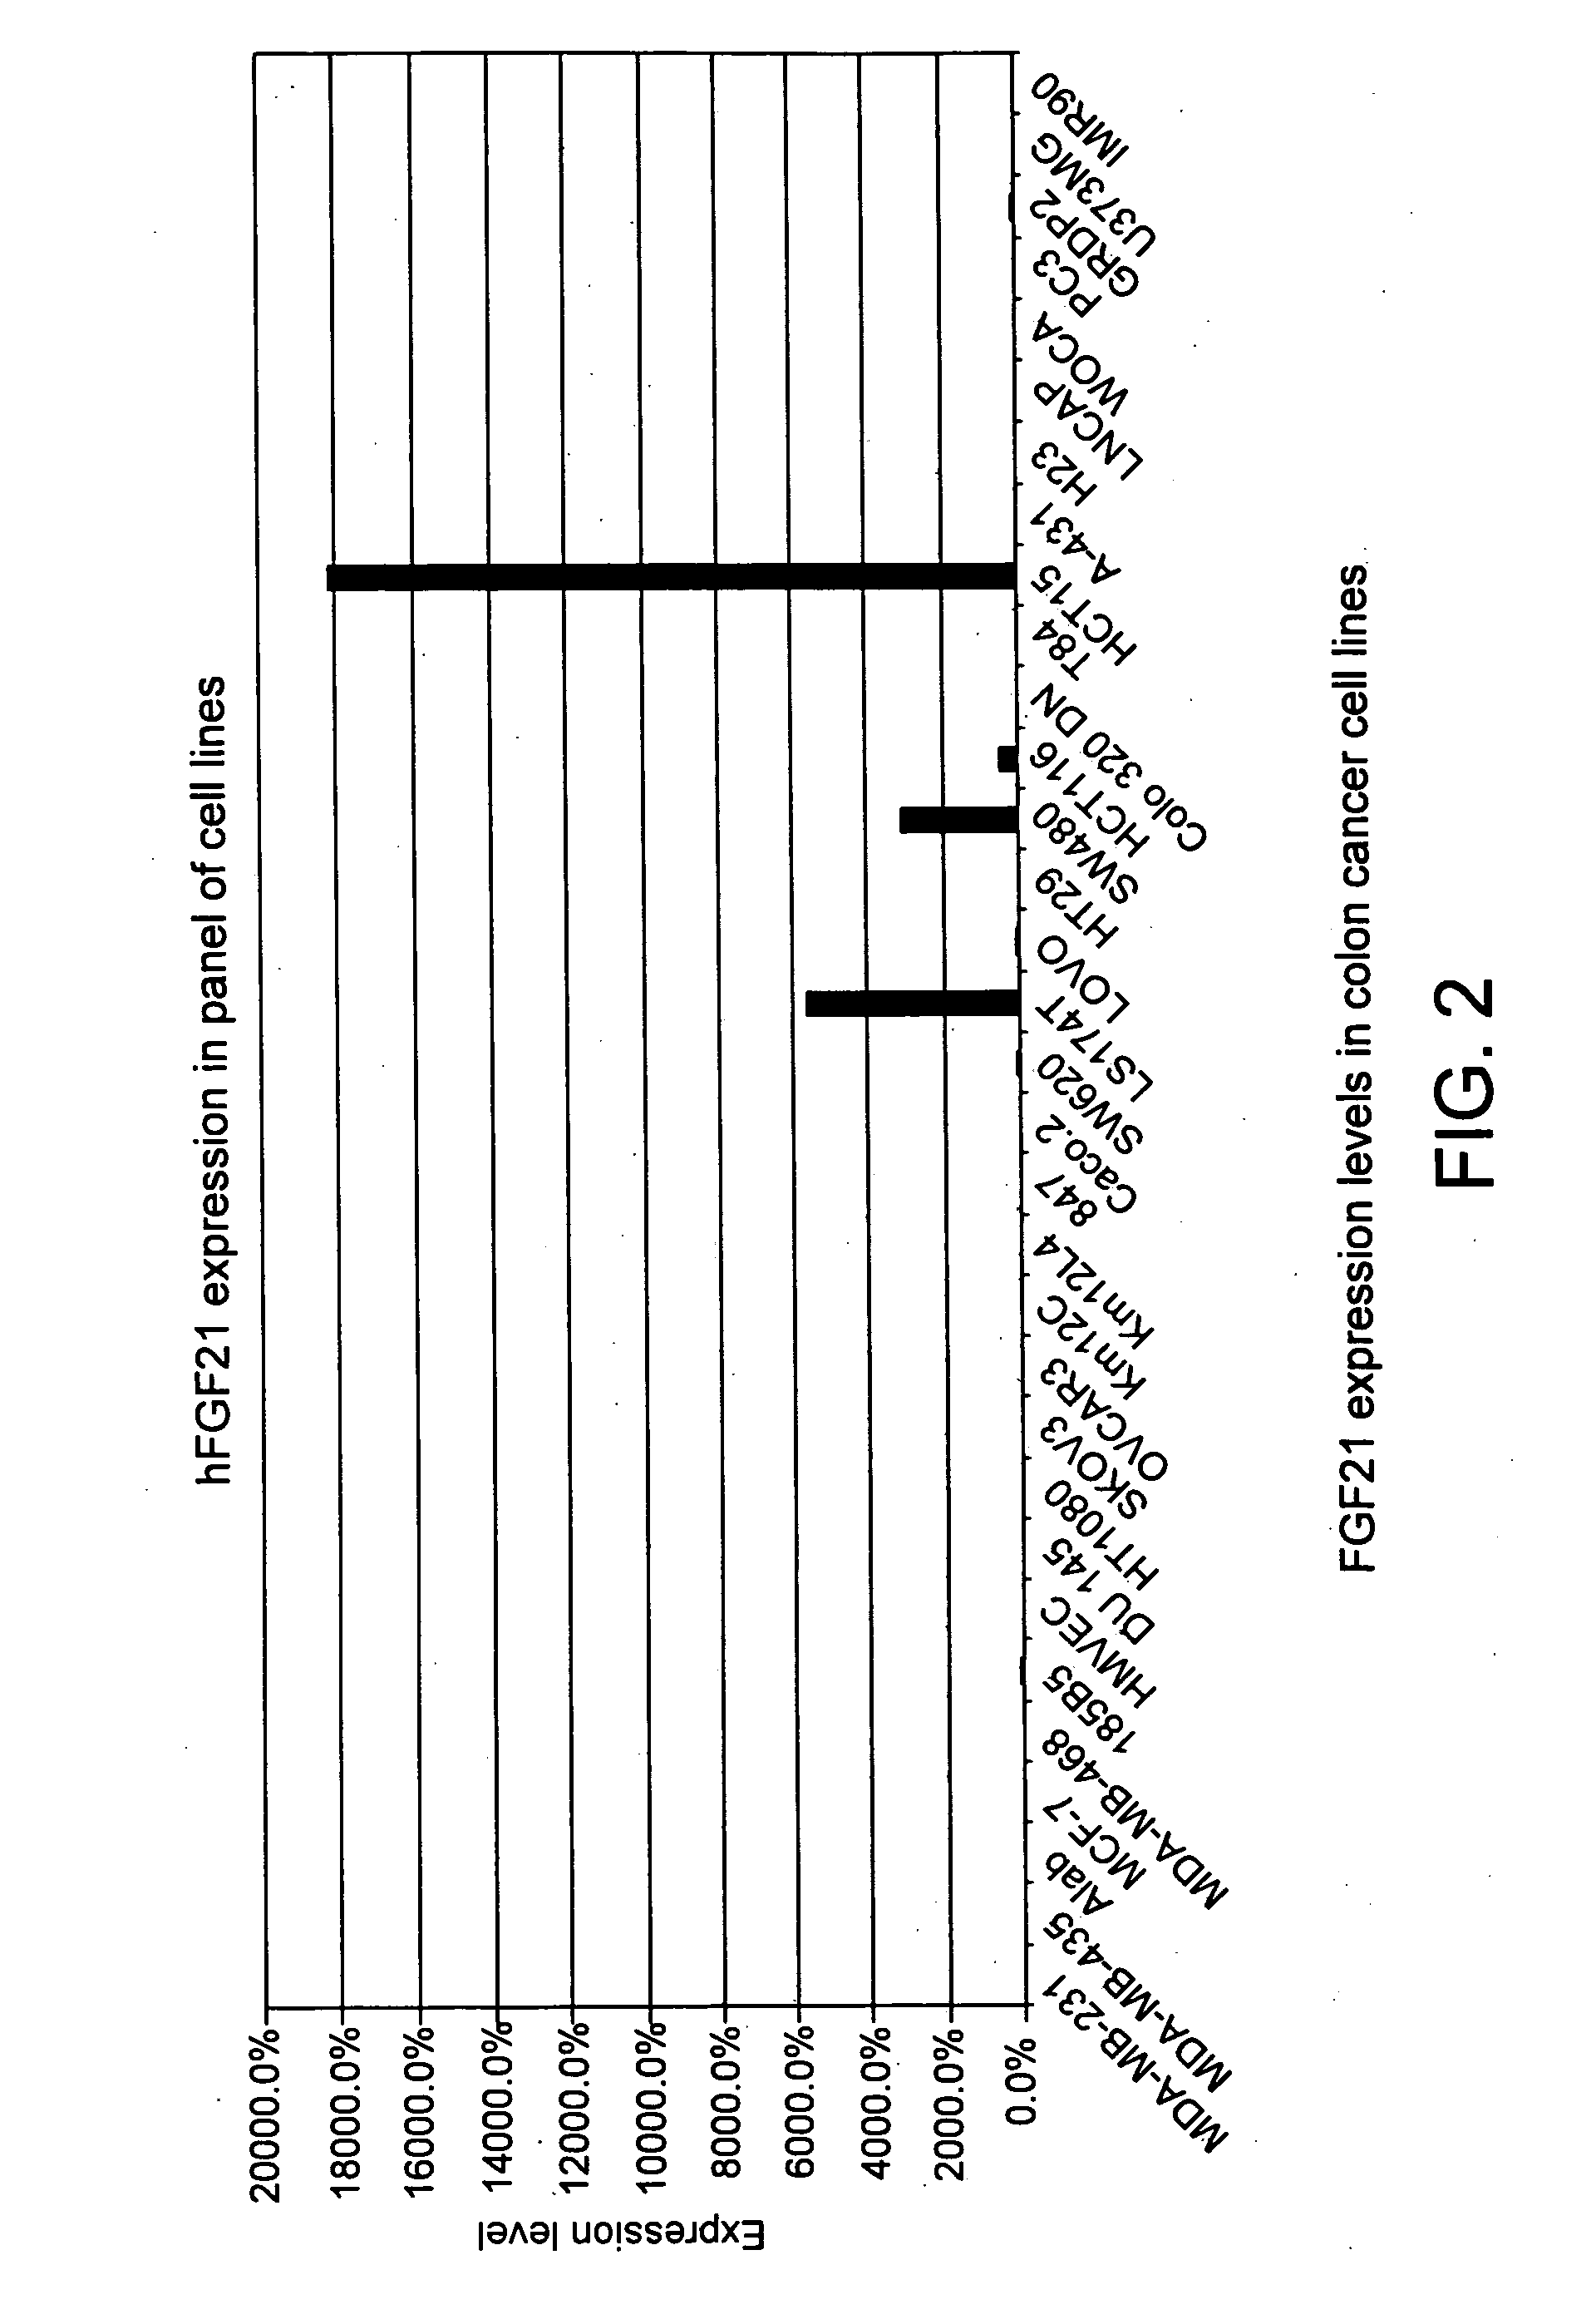 Methods of treating, diagnosing or detecting fgf21-associated disorders